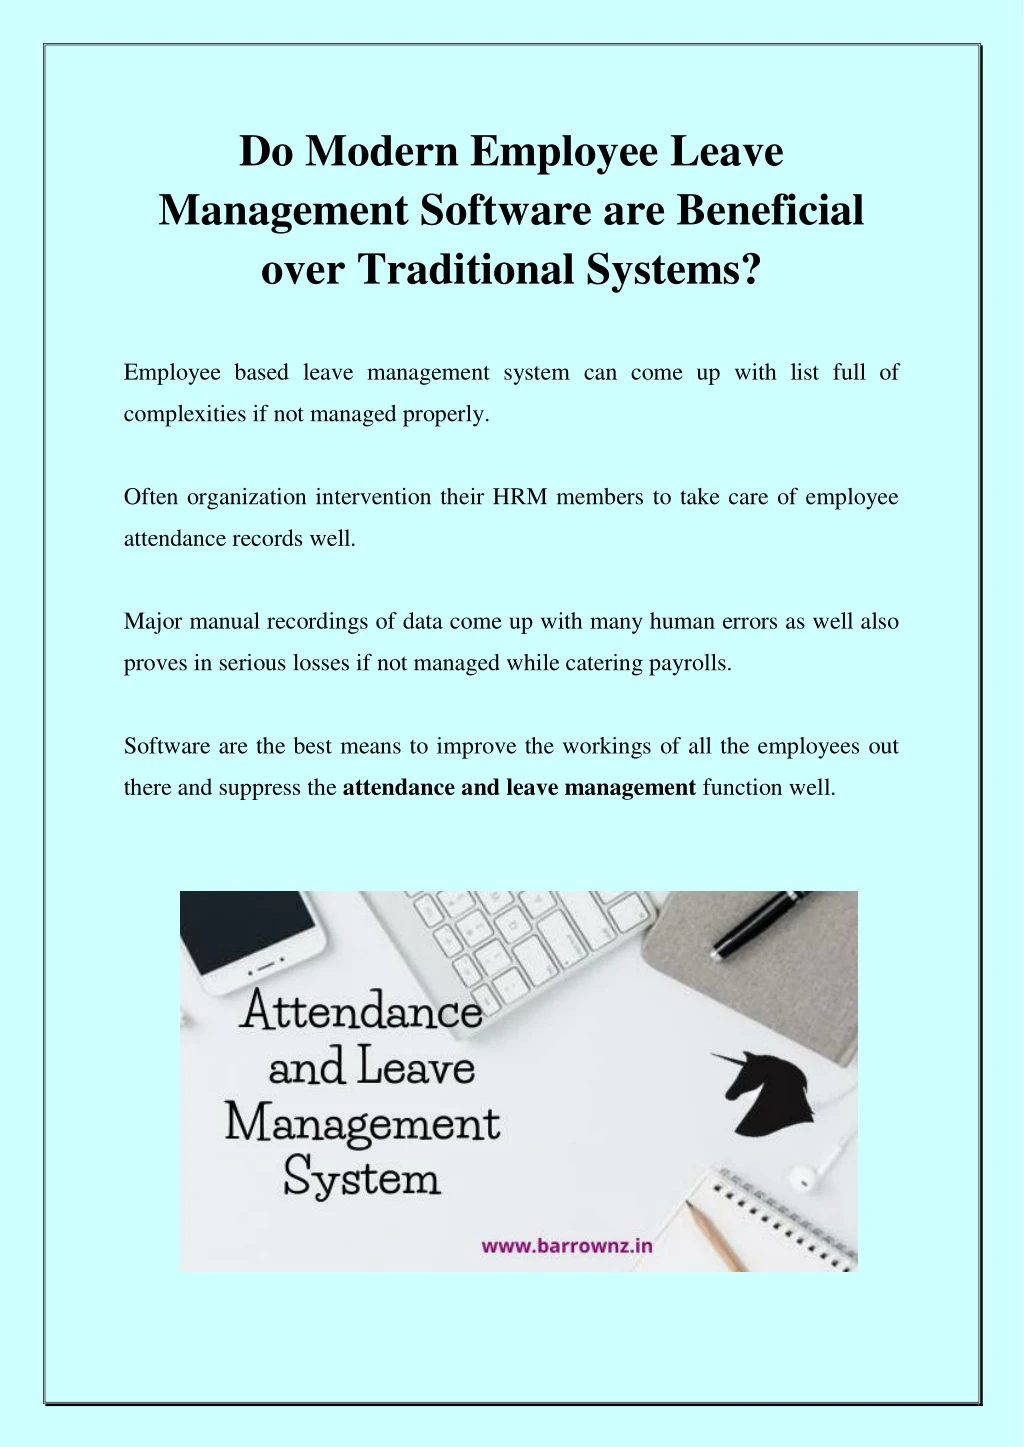 do modern employee leave management software